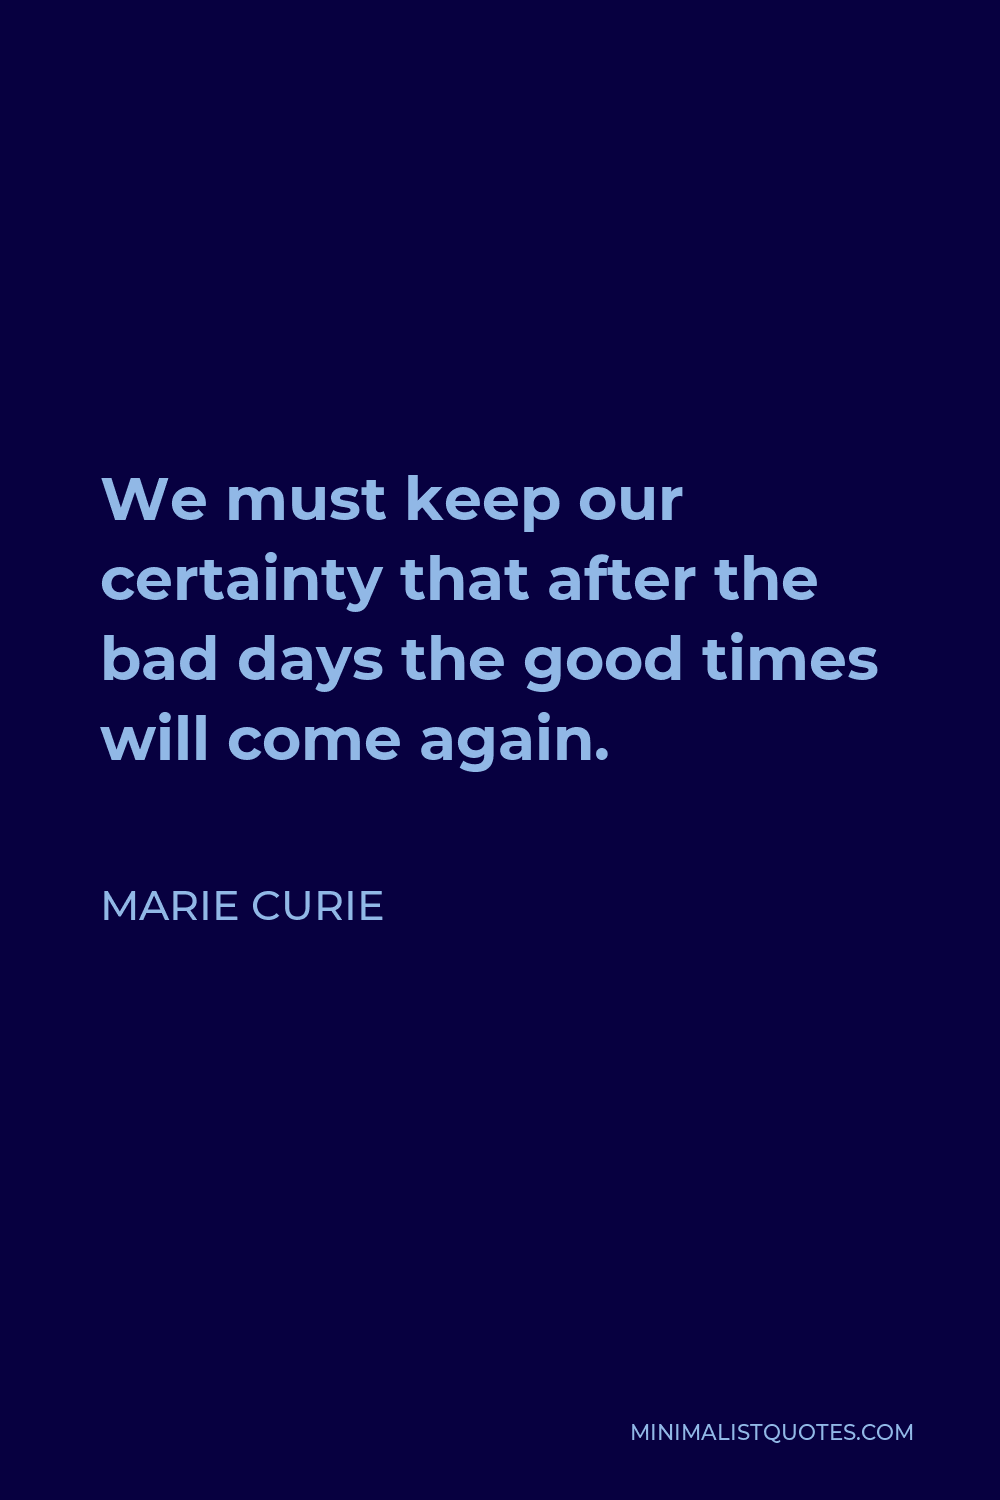 Marie Curie Quote - We must keep our certainty that after the bad days the good times will come again.